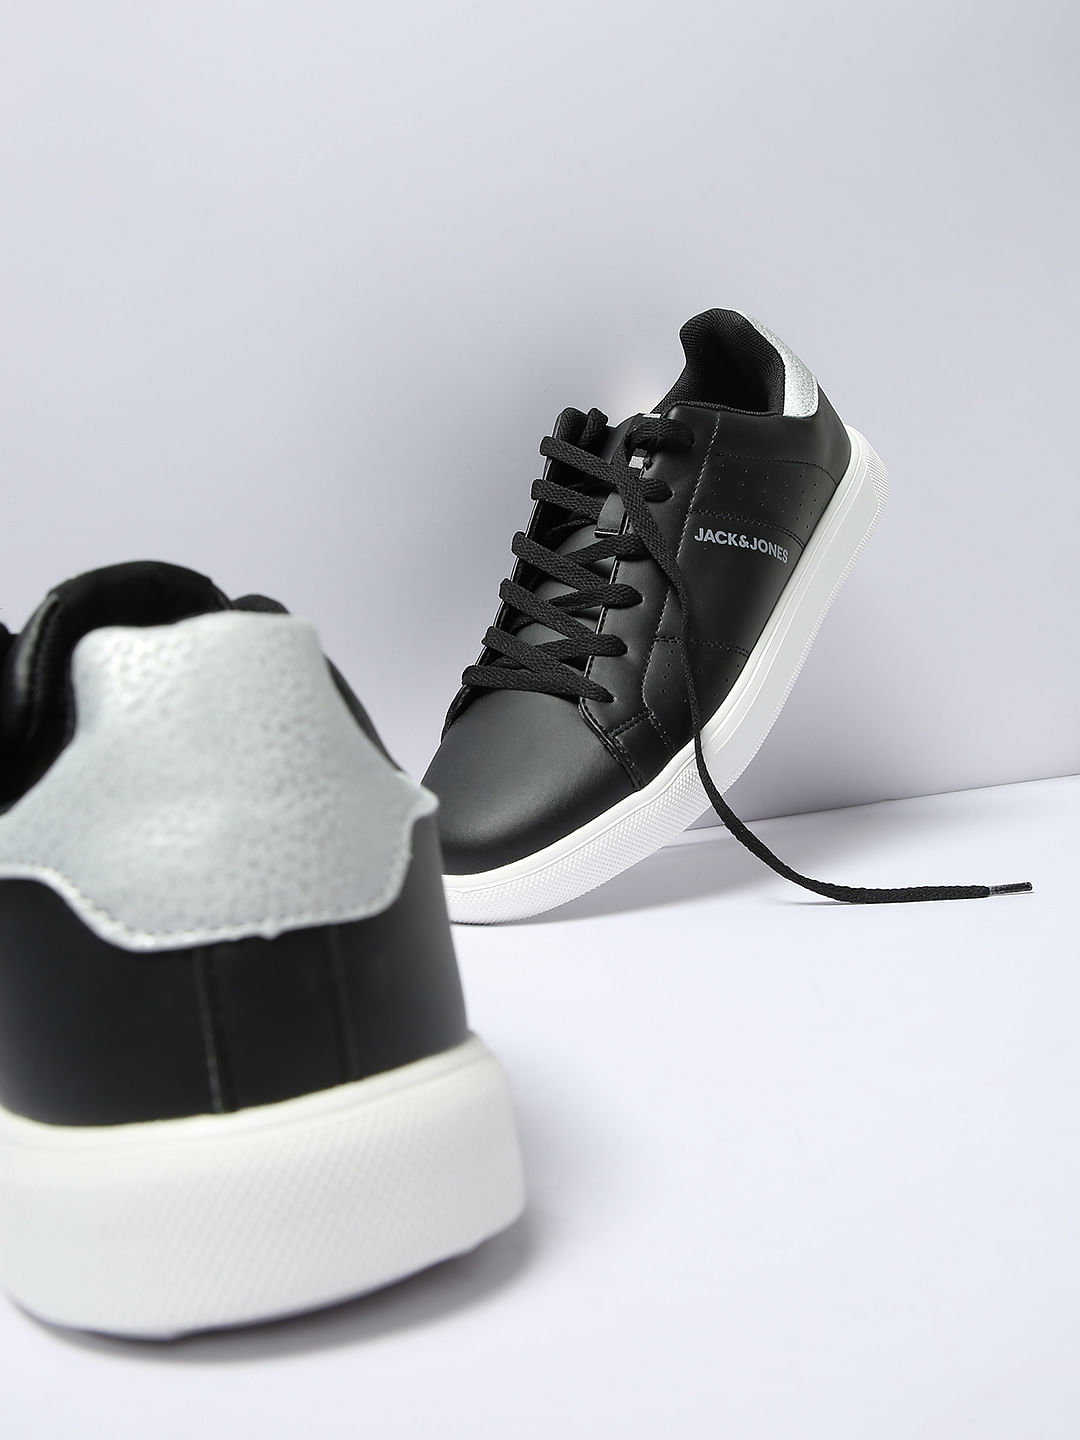 Buy Sneakers For Men: Fence-Wht-Blk | Campus Shoes